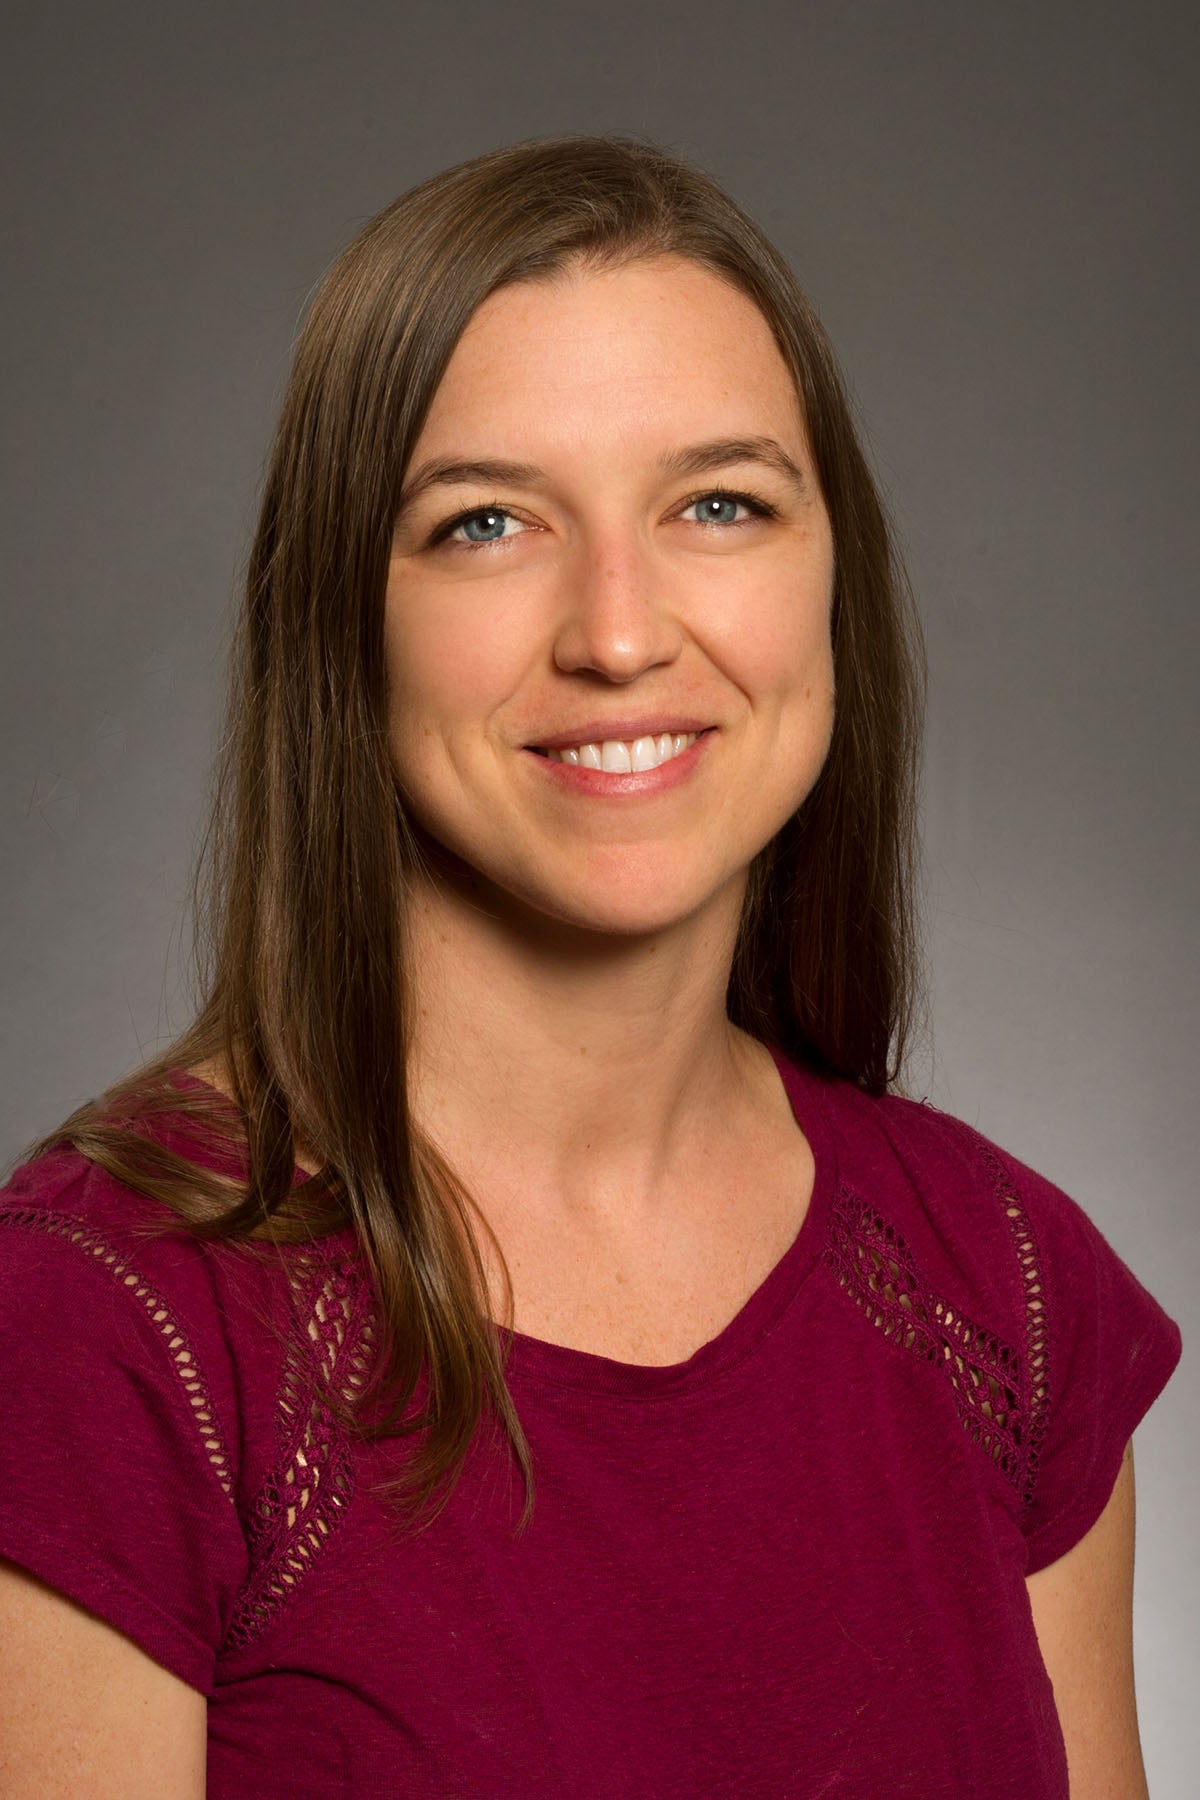 Sarab Dalrymple, Faculty Associate and Clinical Assistant Professor in the Department of Biological Sciences